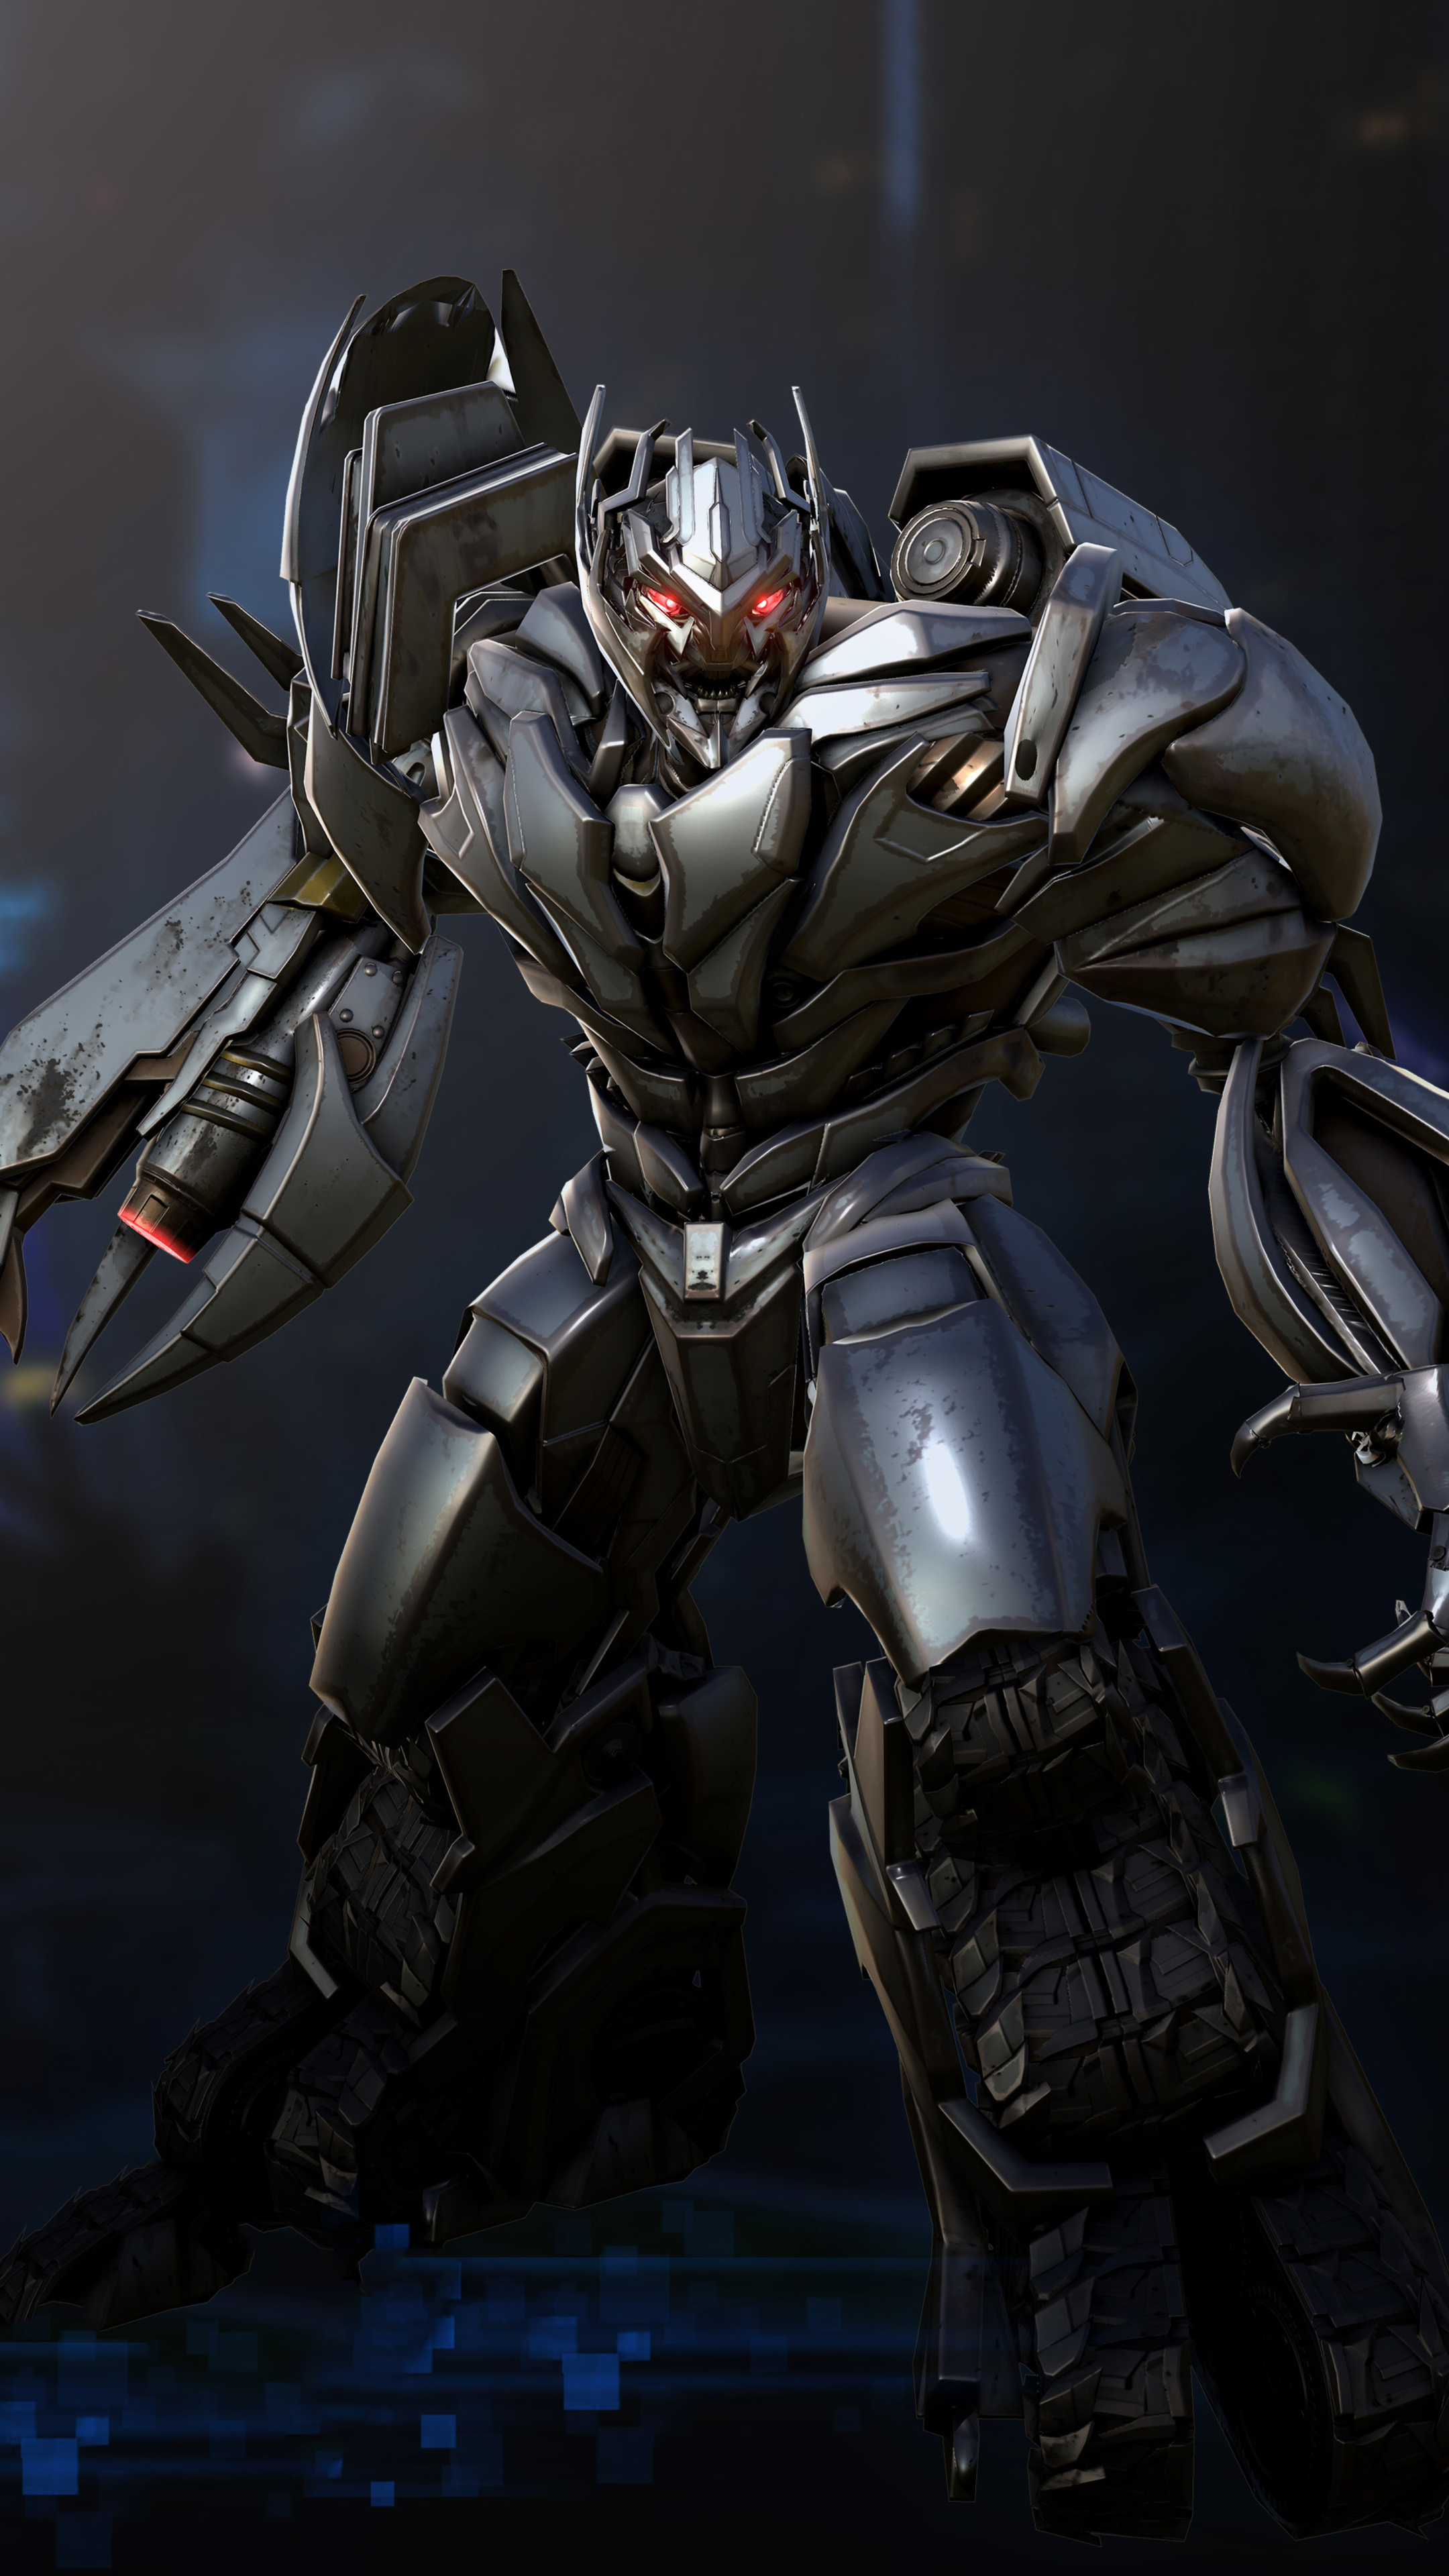 Megatron (Transformers), Forged to Fight, Sony Xperia, Cutting-edge wallpapers, 2160x3840 4K Phone